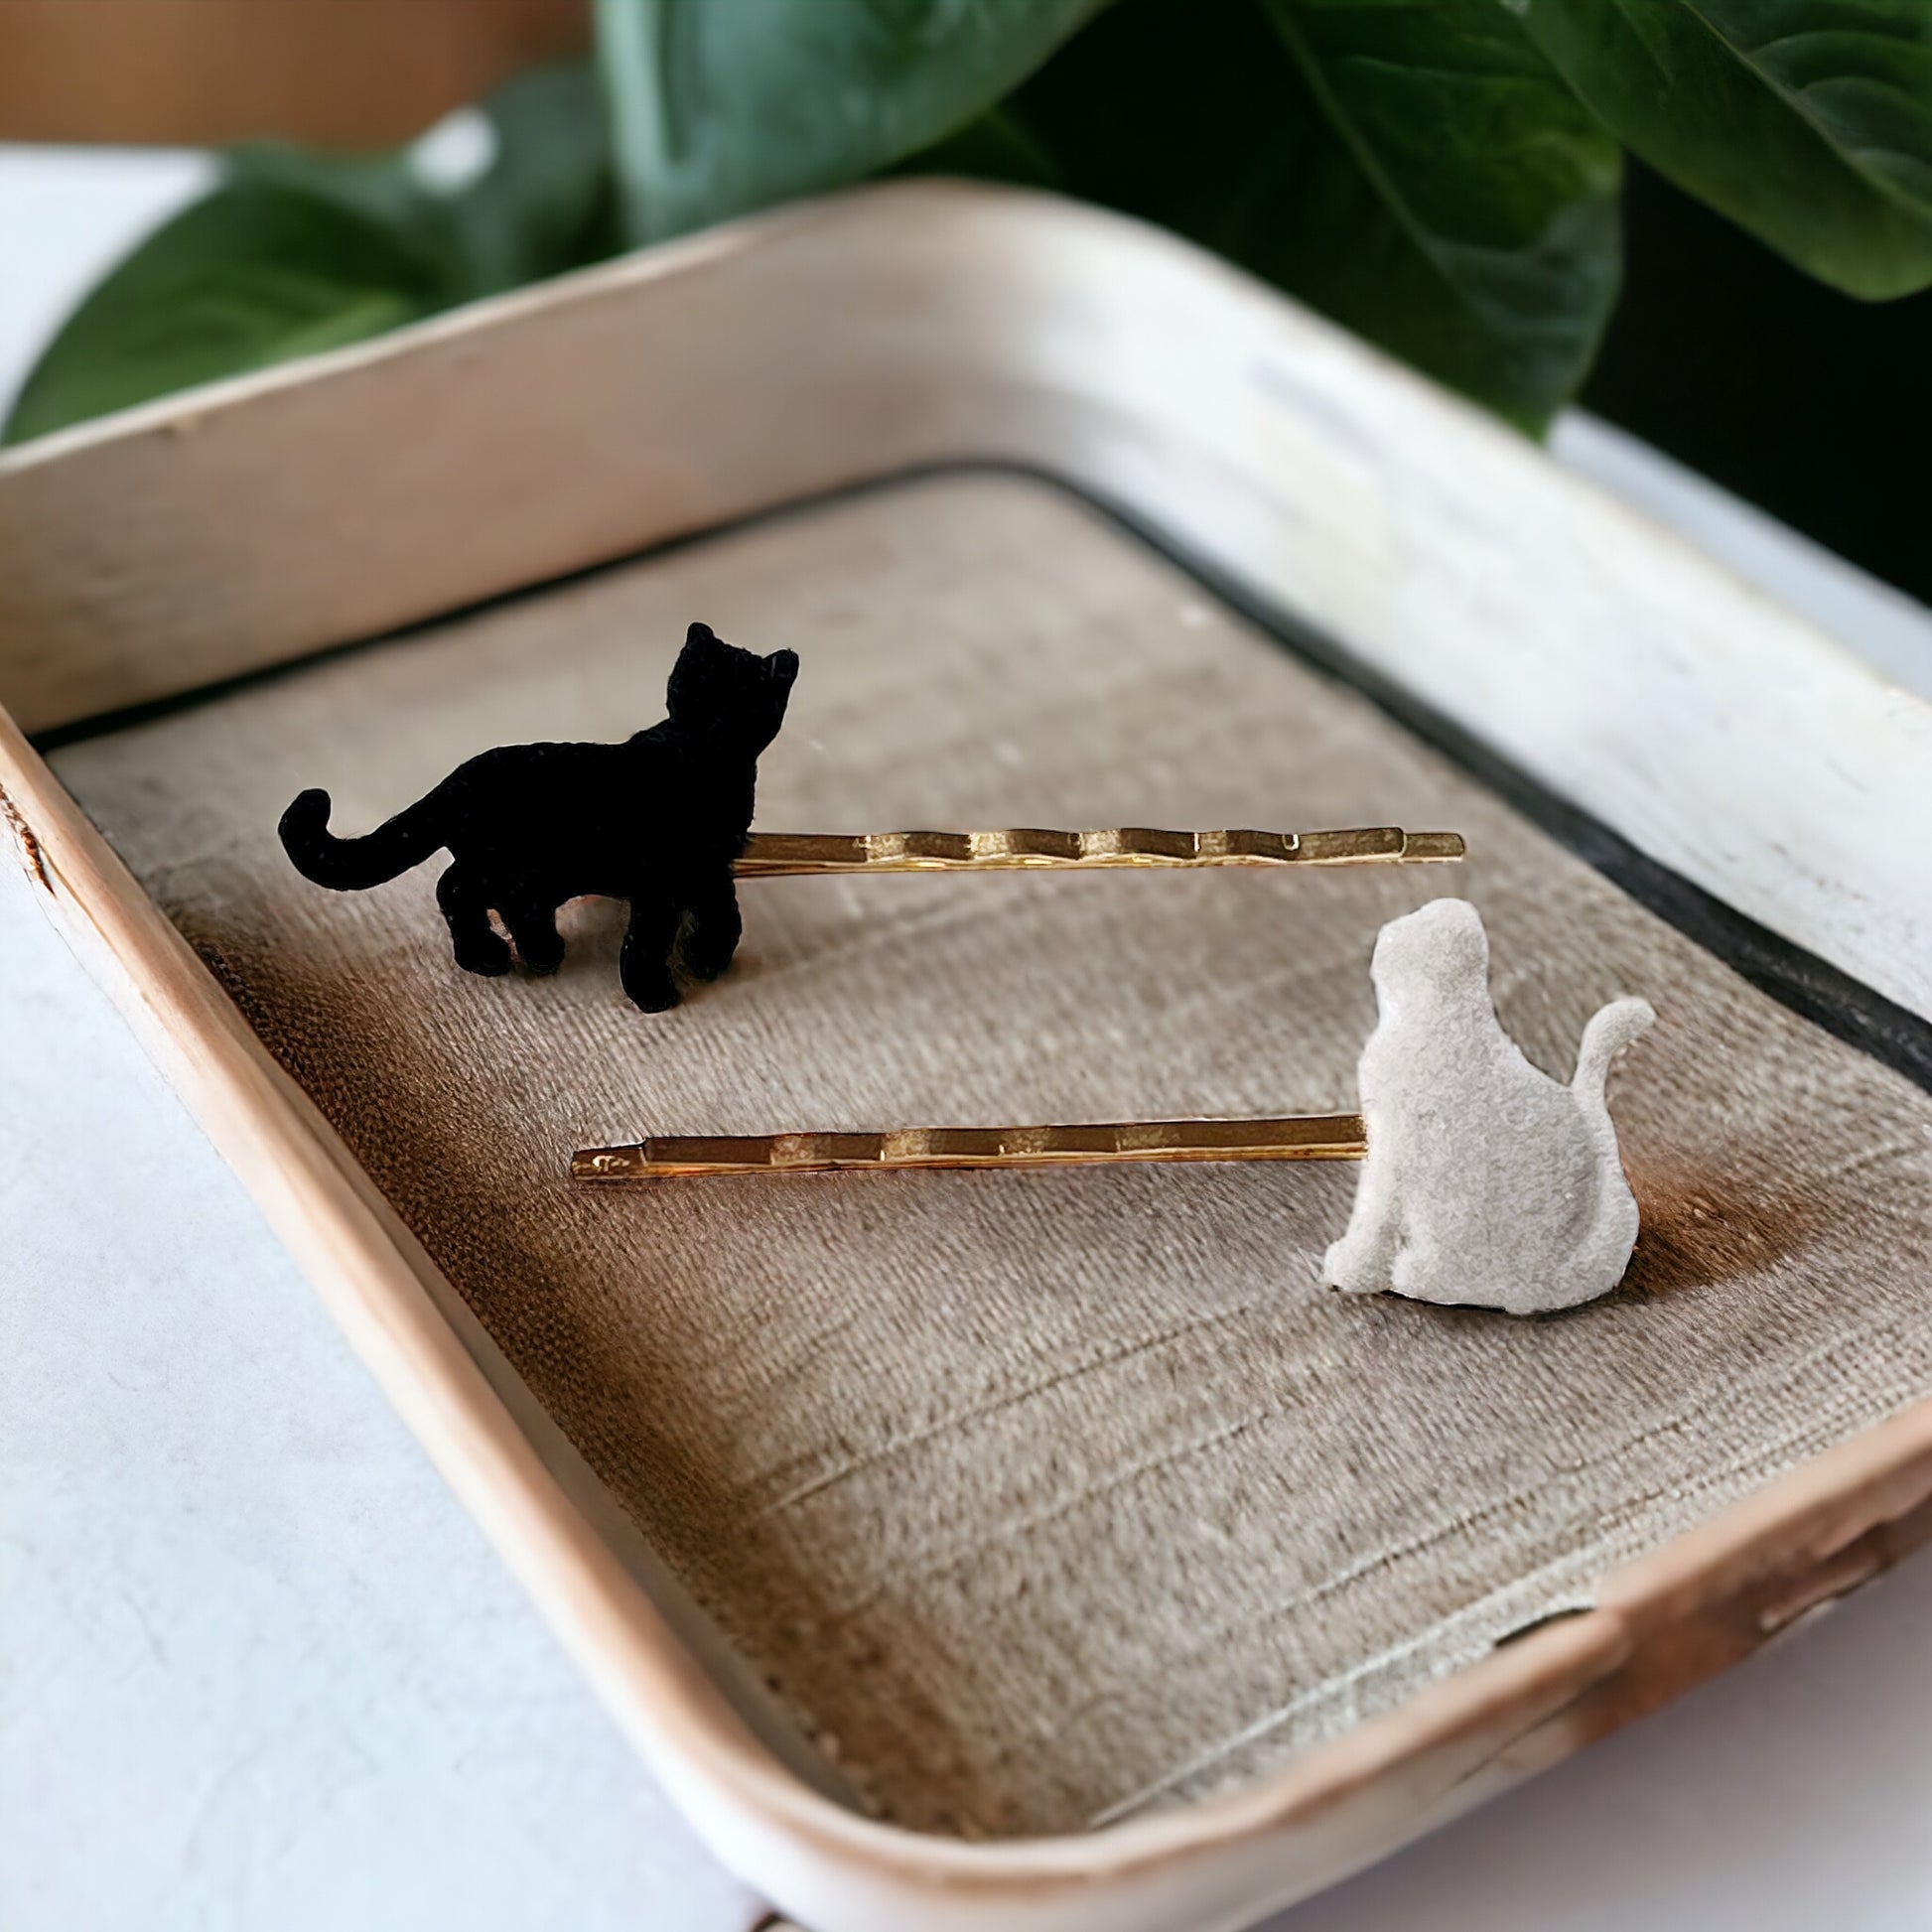 Gray & Black Felted Cat Hair Pins - Quirky Accessories for Feline-Inspired Hairstyles